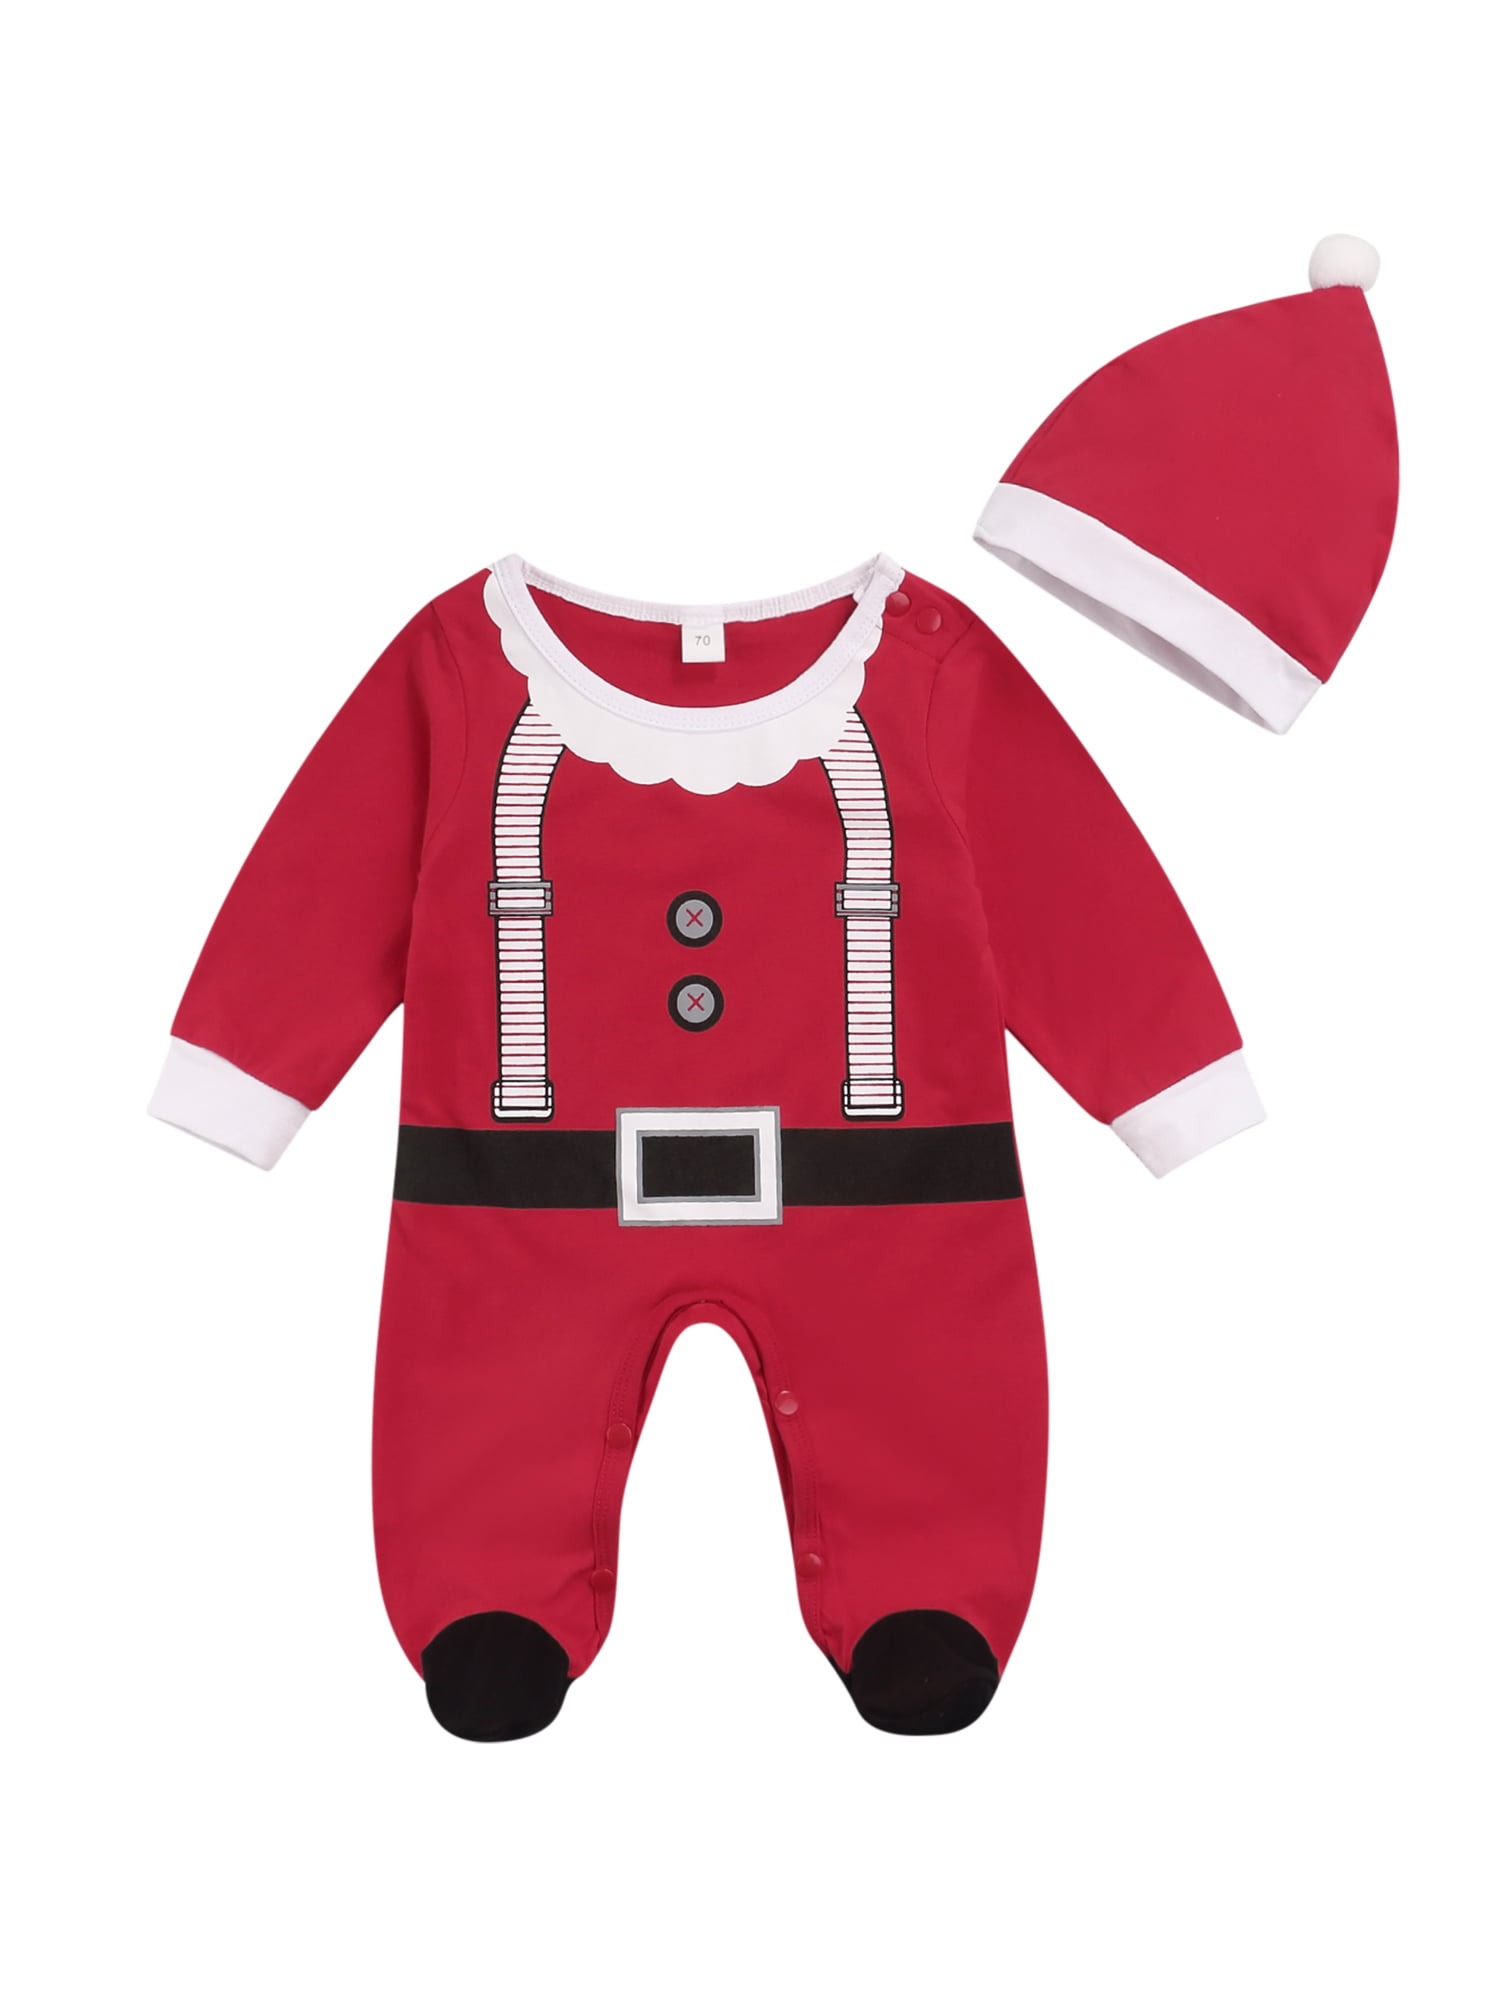 Toddler Baby Girls Boys Thick Christmas Santa Cosplay Tops Pants Hat Set Outfits 0-3 Years Old 